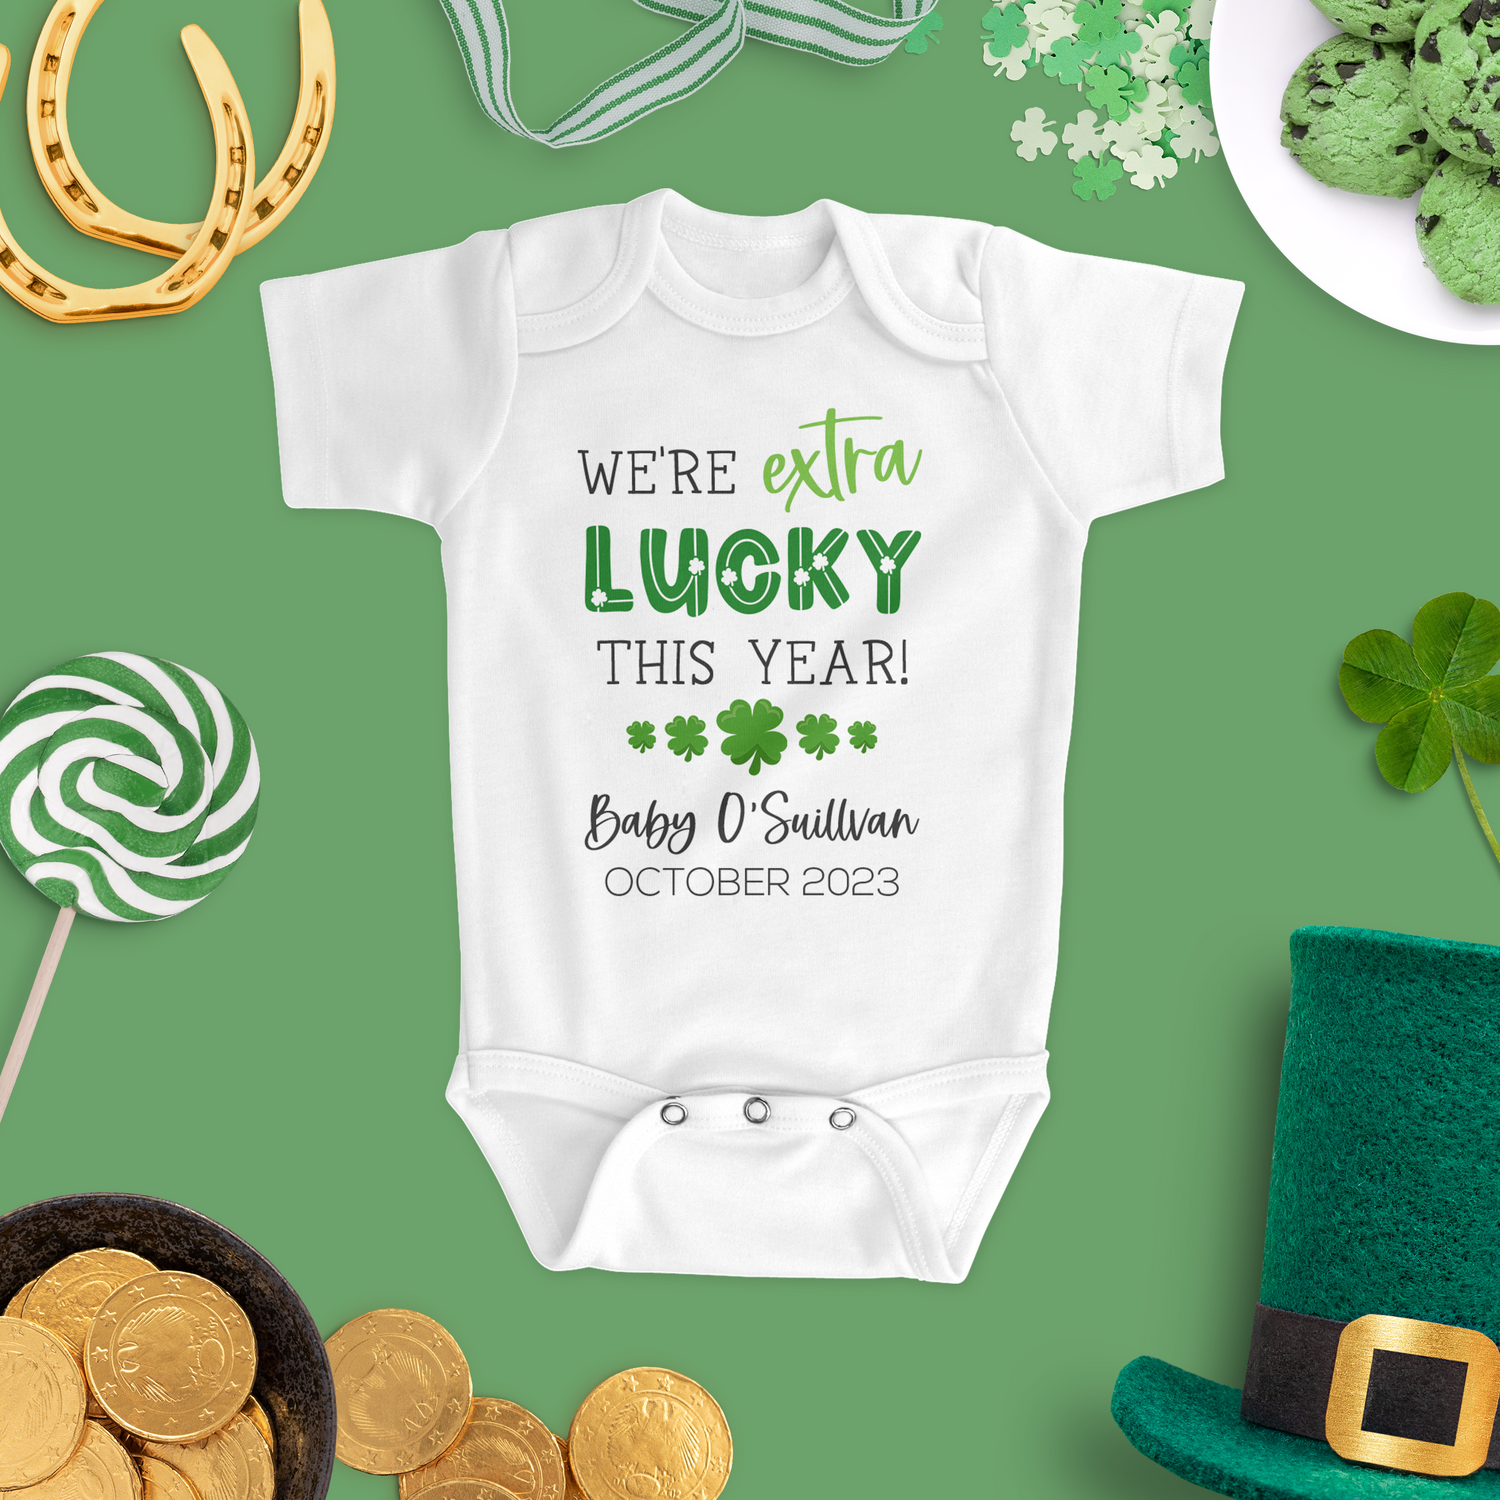 St. Patrick's Day-Themed Baby Bodysuit Pregnancy Announcements